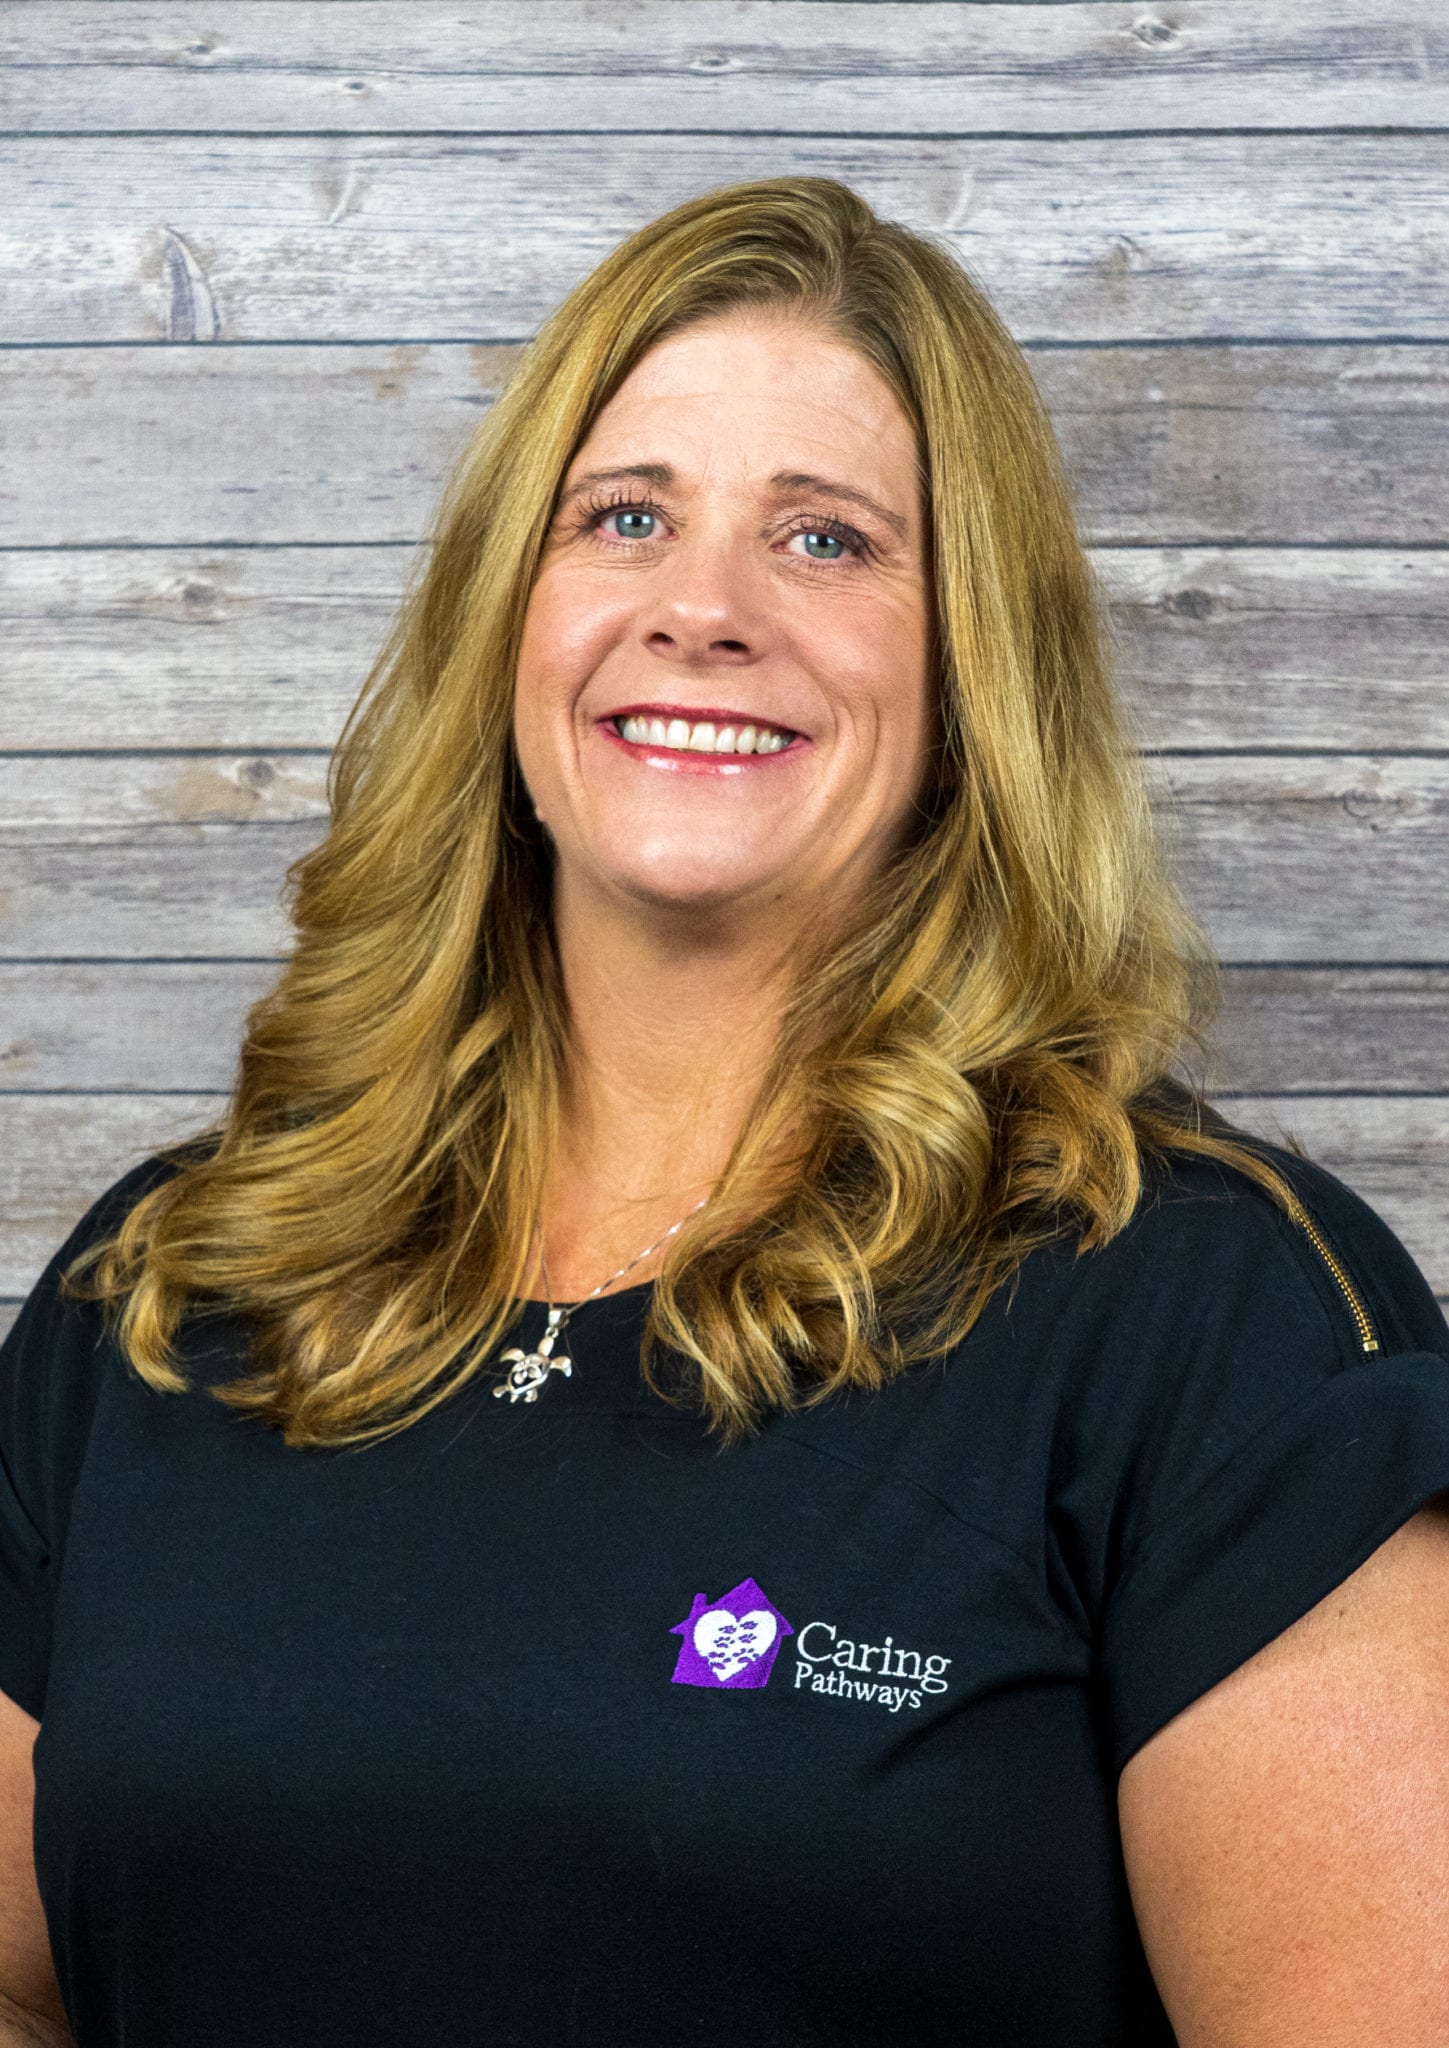 Kimberly Kemper, Director of Client Care Services